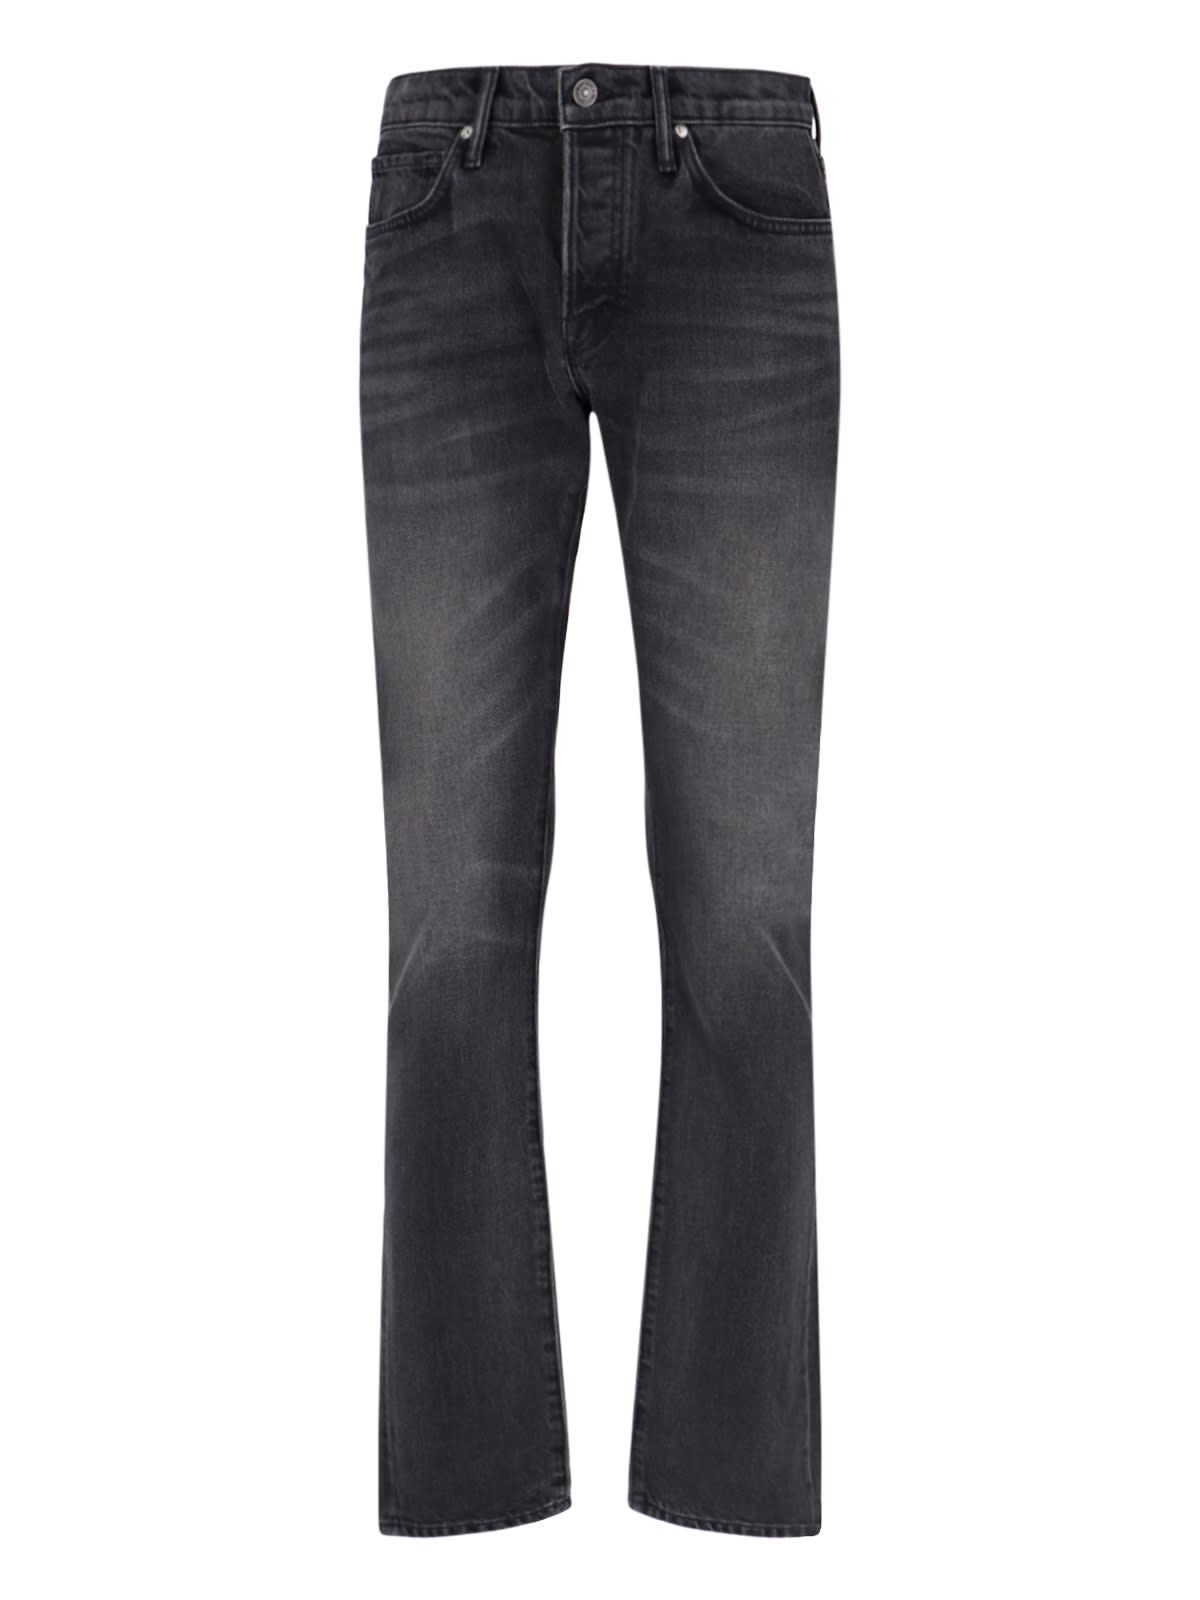 TOM FORD JEANS